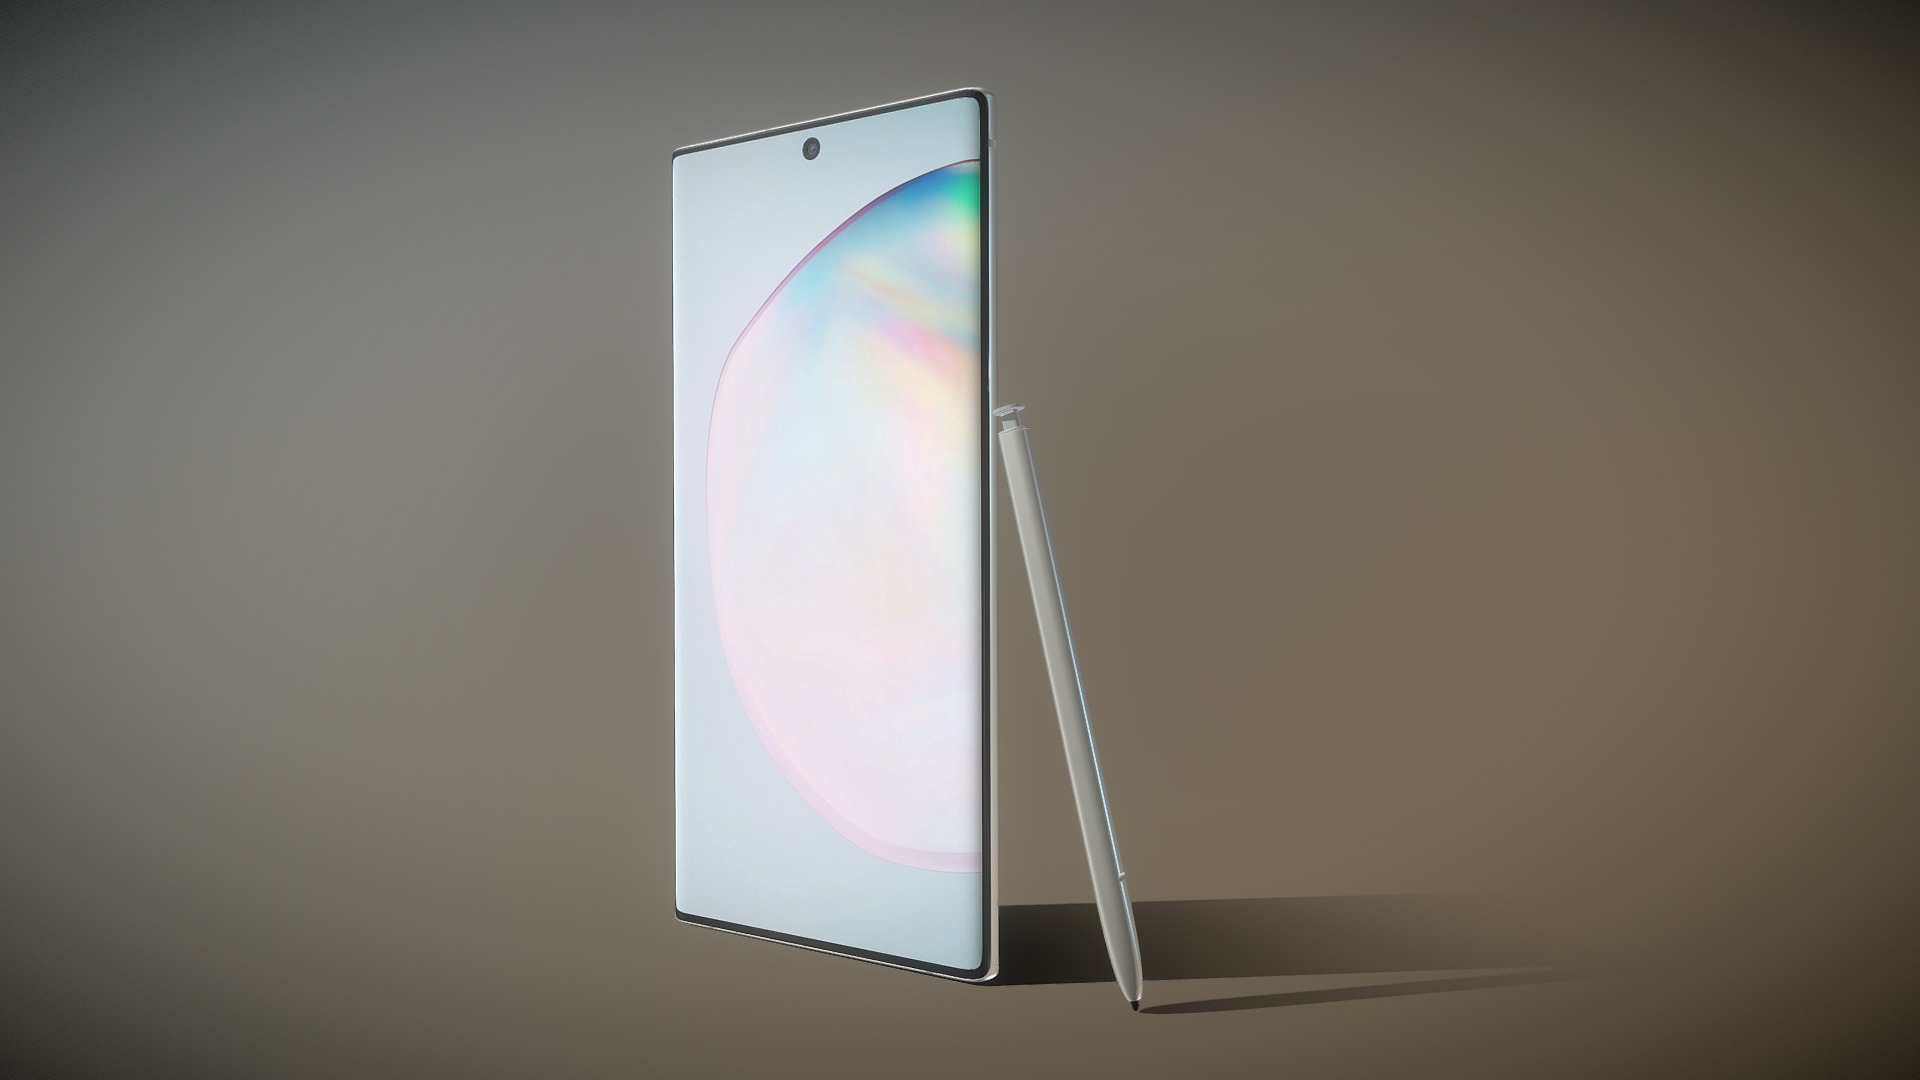 3D model Samsung Galaxy Note 10 plus - This is a 3D model of the Samsung Galaxy Note 10 plus. The 3D model is about a tablet with a stylus.